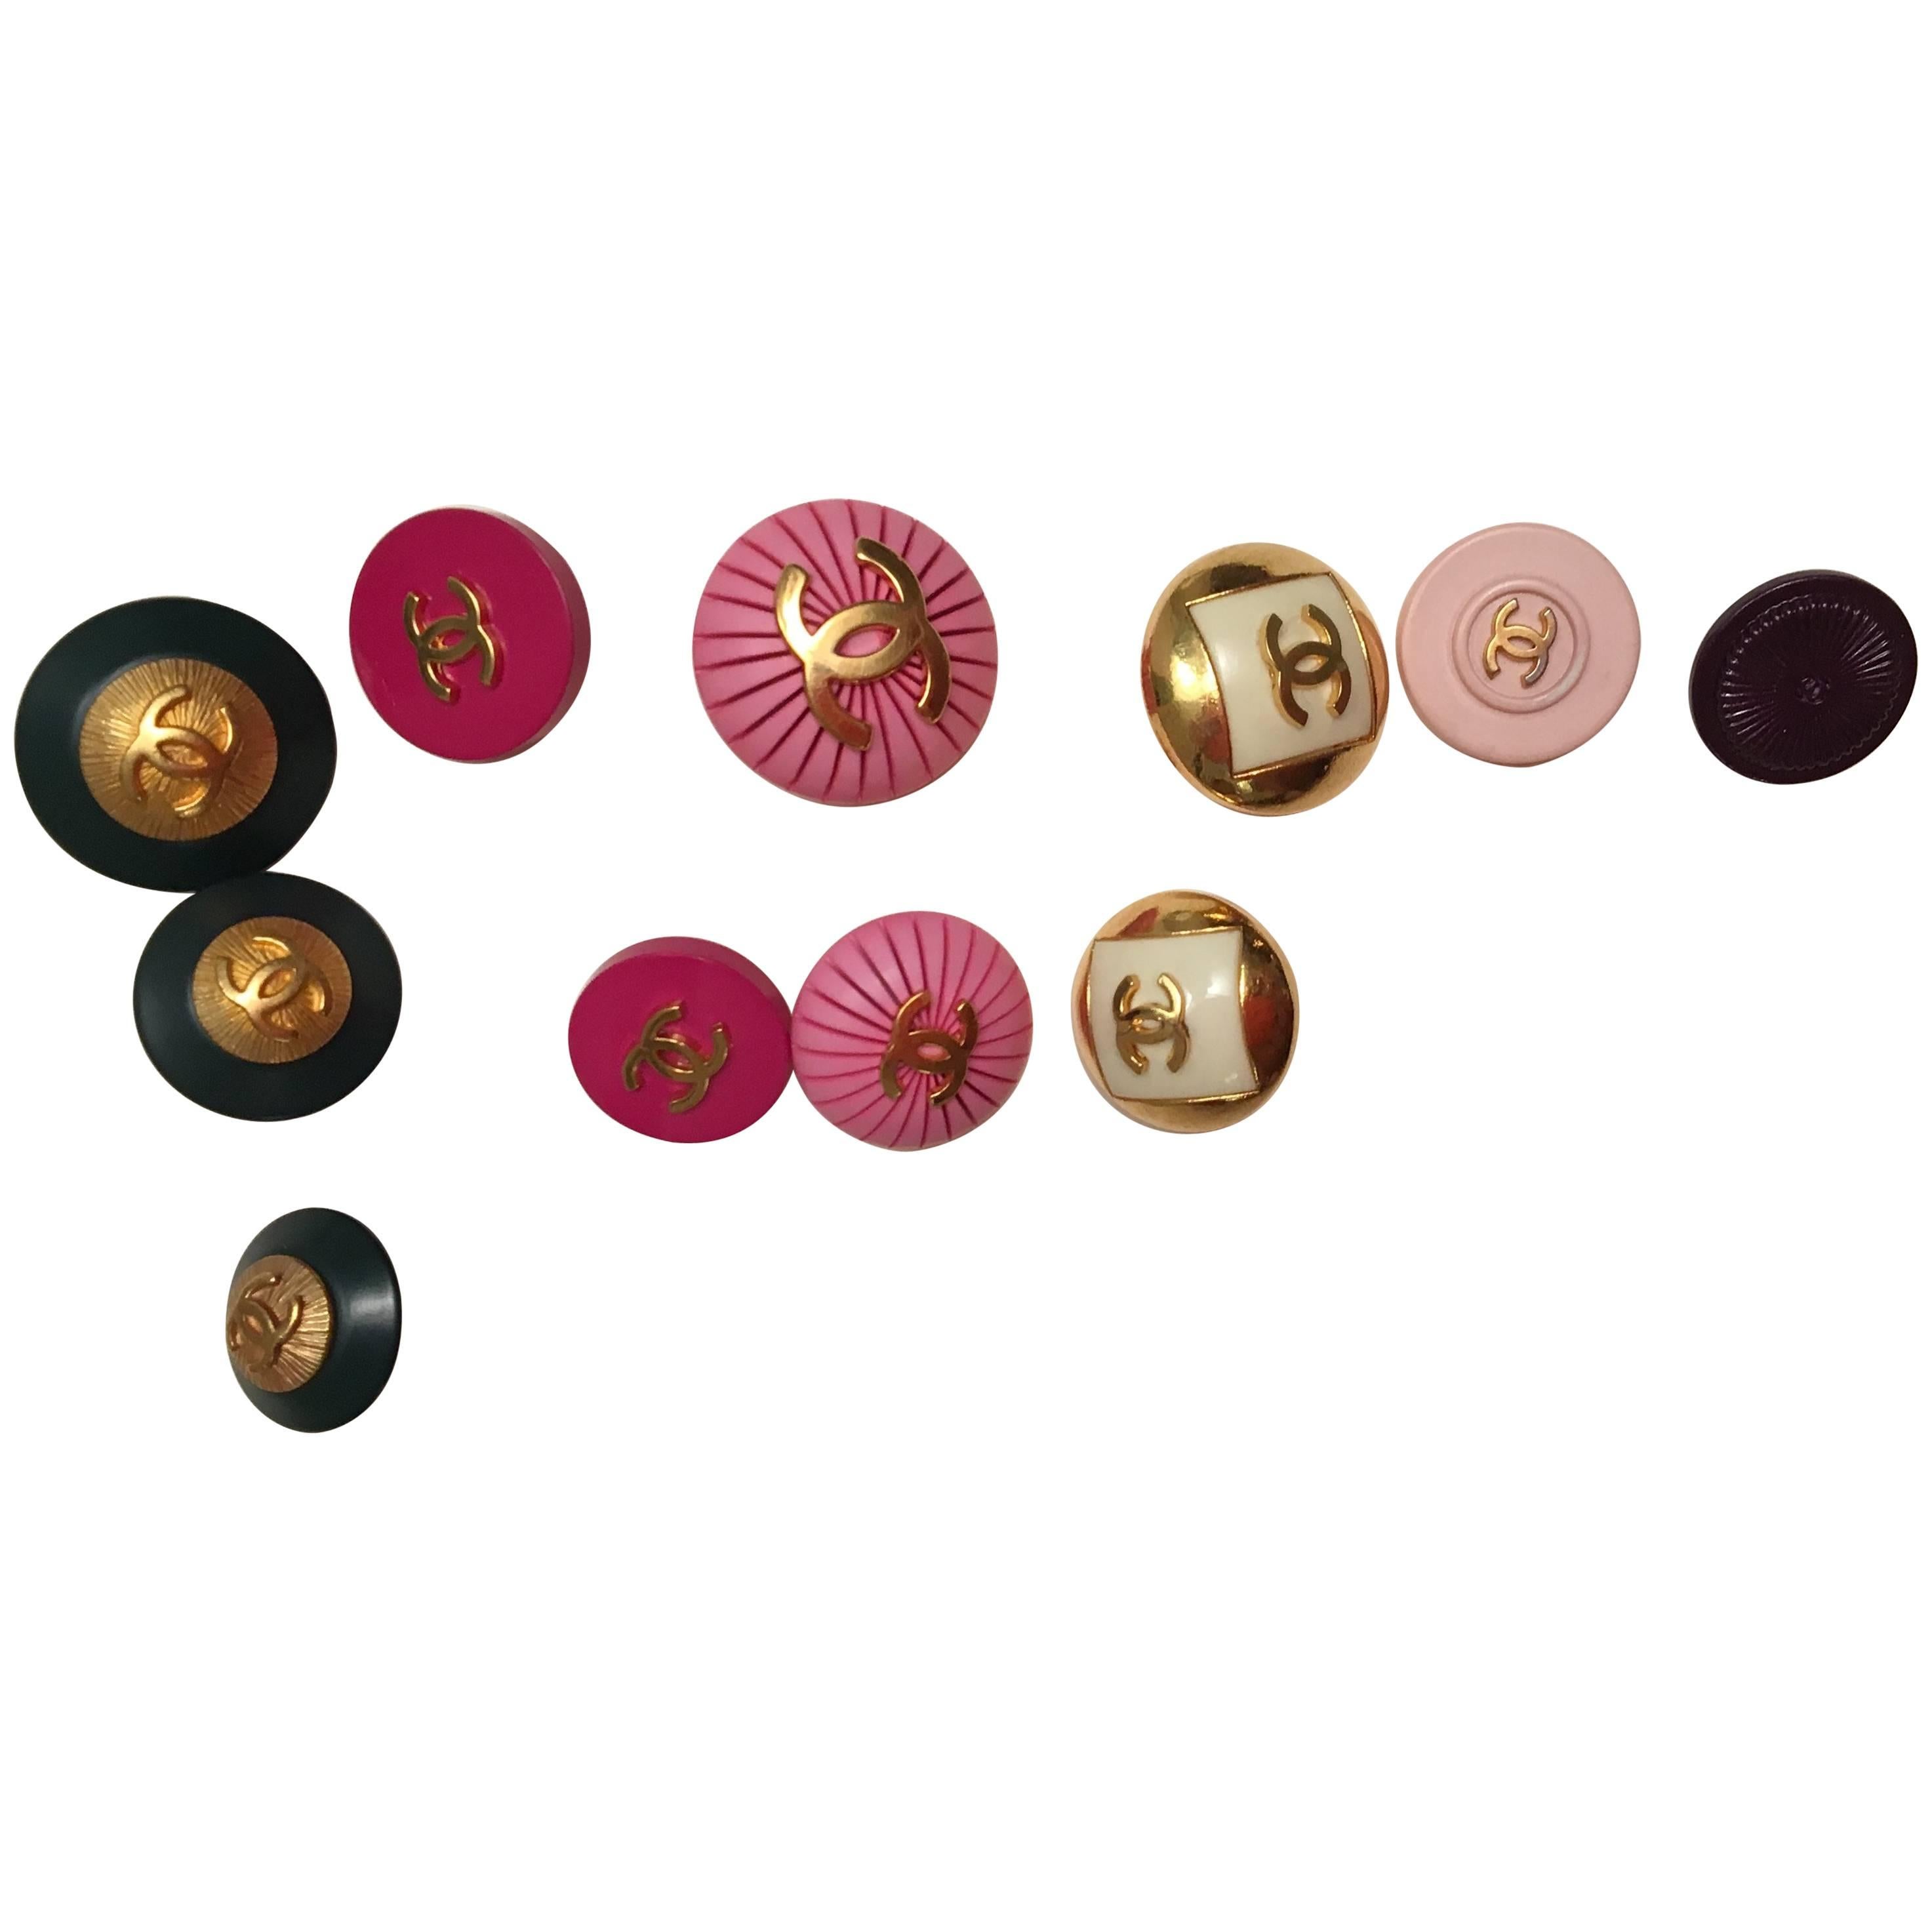 11 Vintage Chanel Buttons - Assorted Colors and Sizes